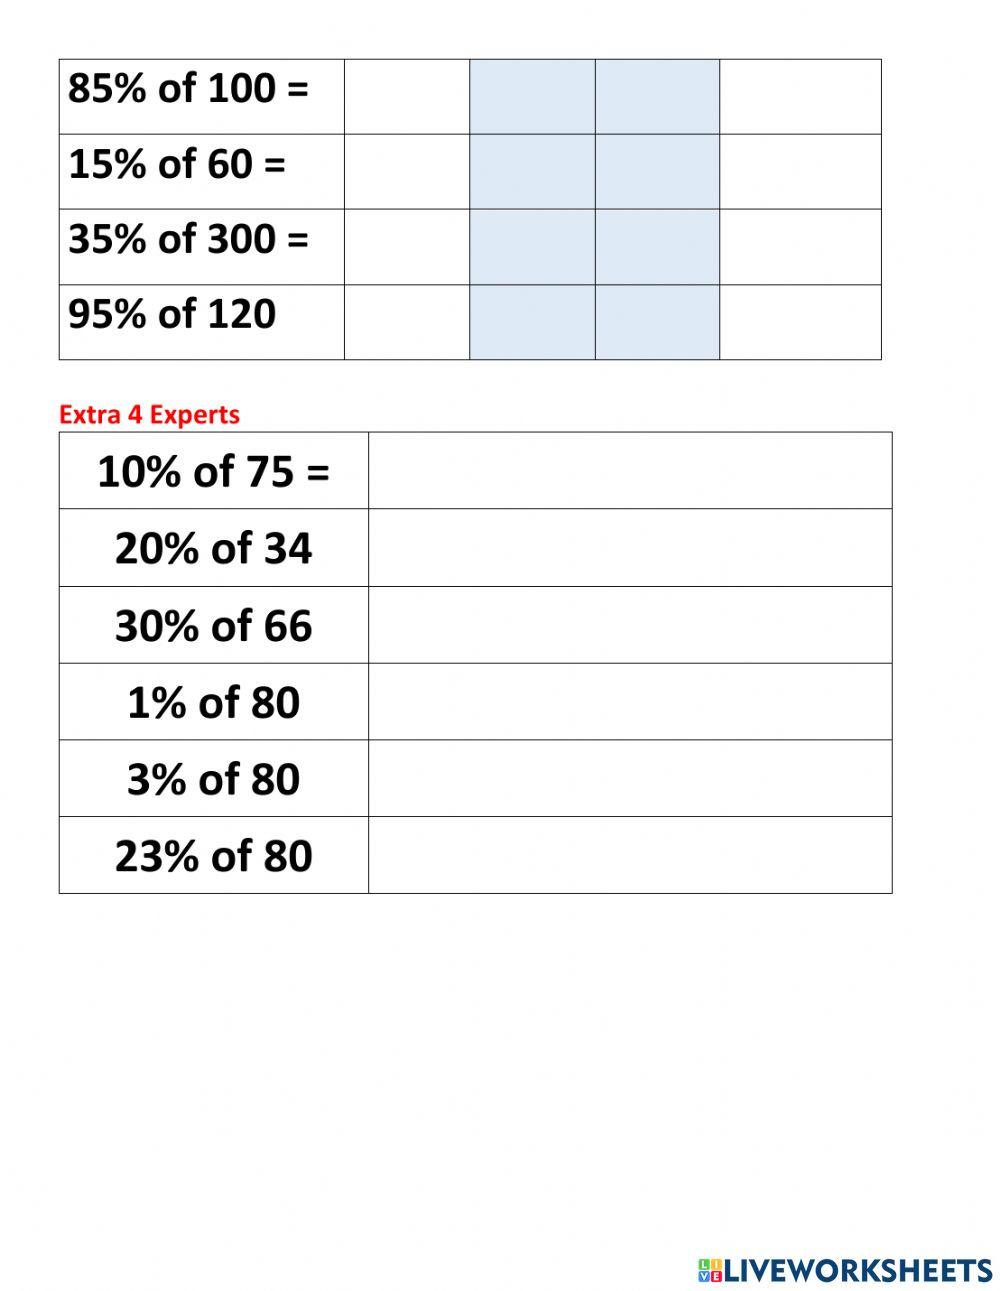 Percentage of a whole number